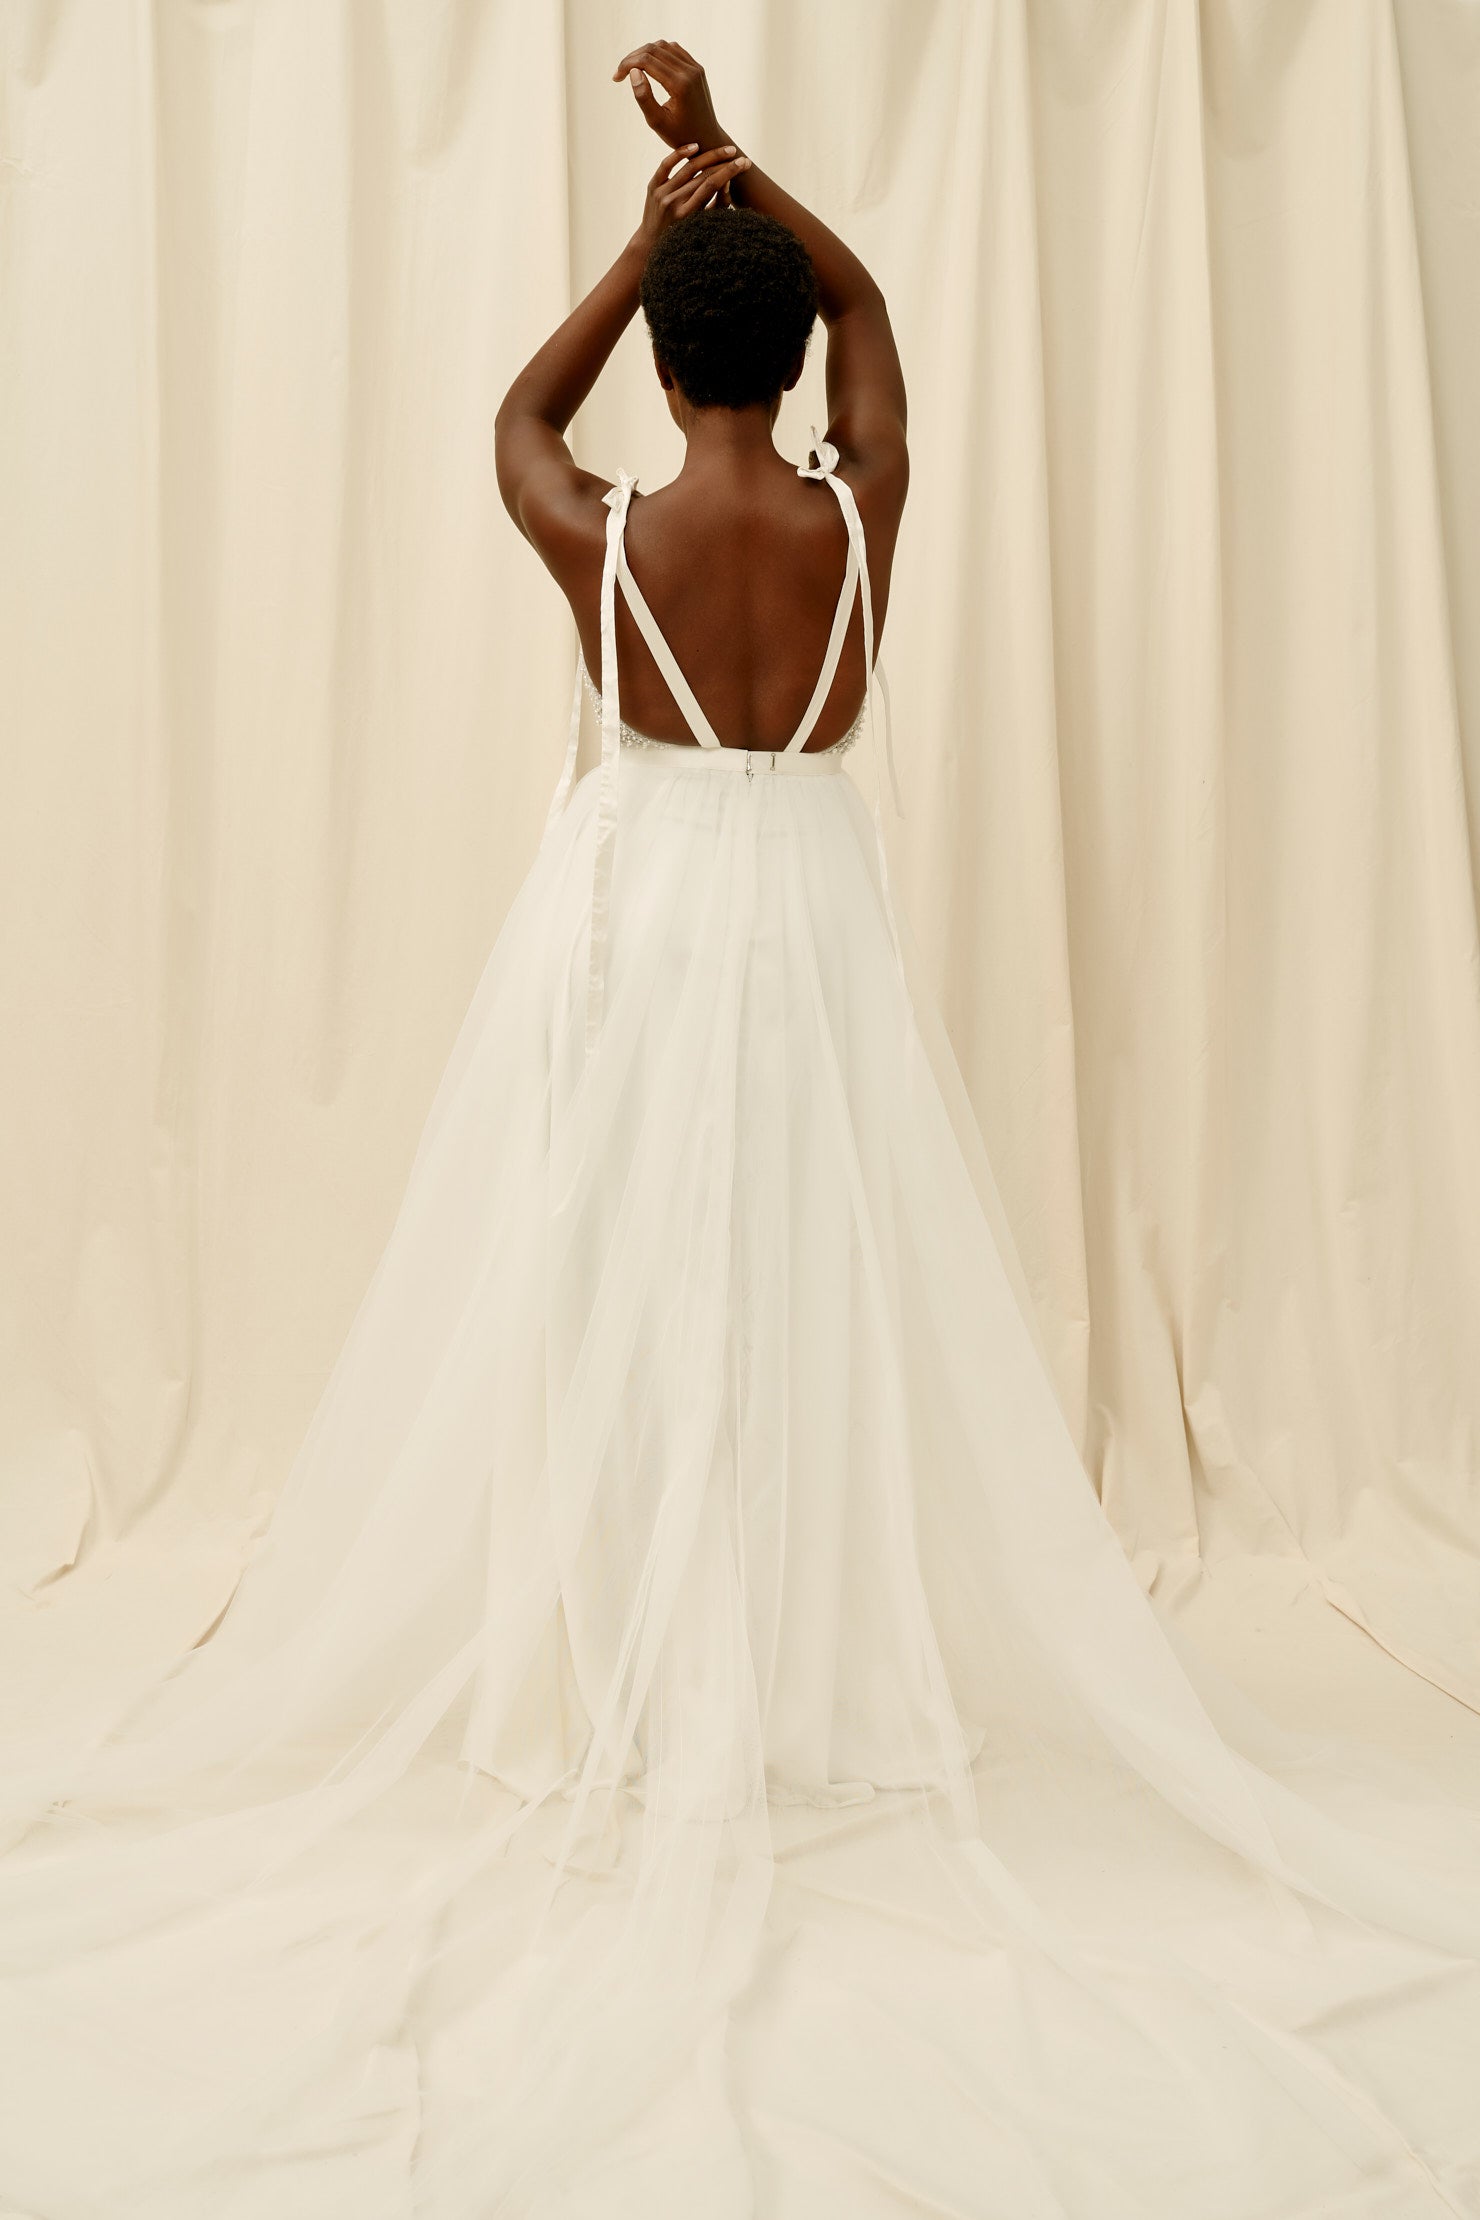 Open backed wedding dress with a soft tulle skirt and a long train